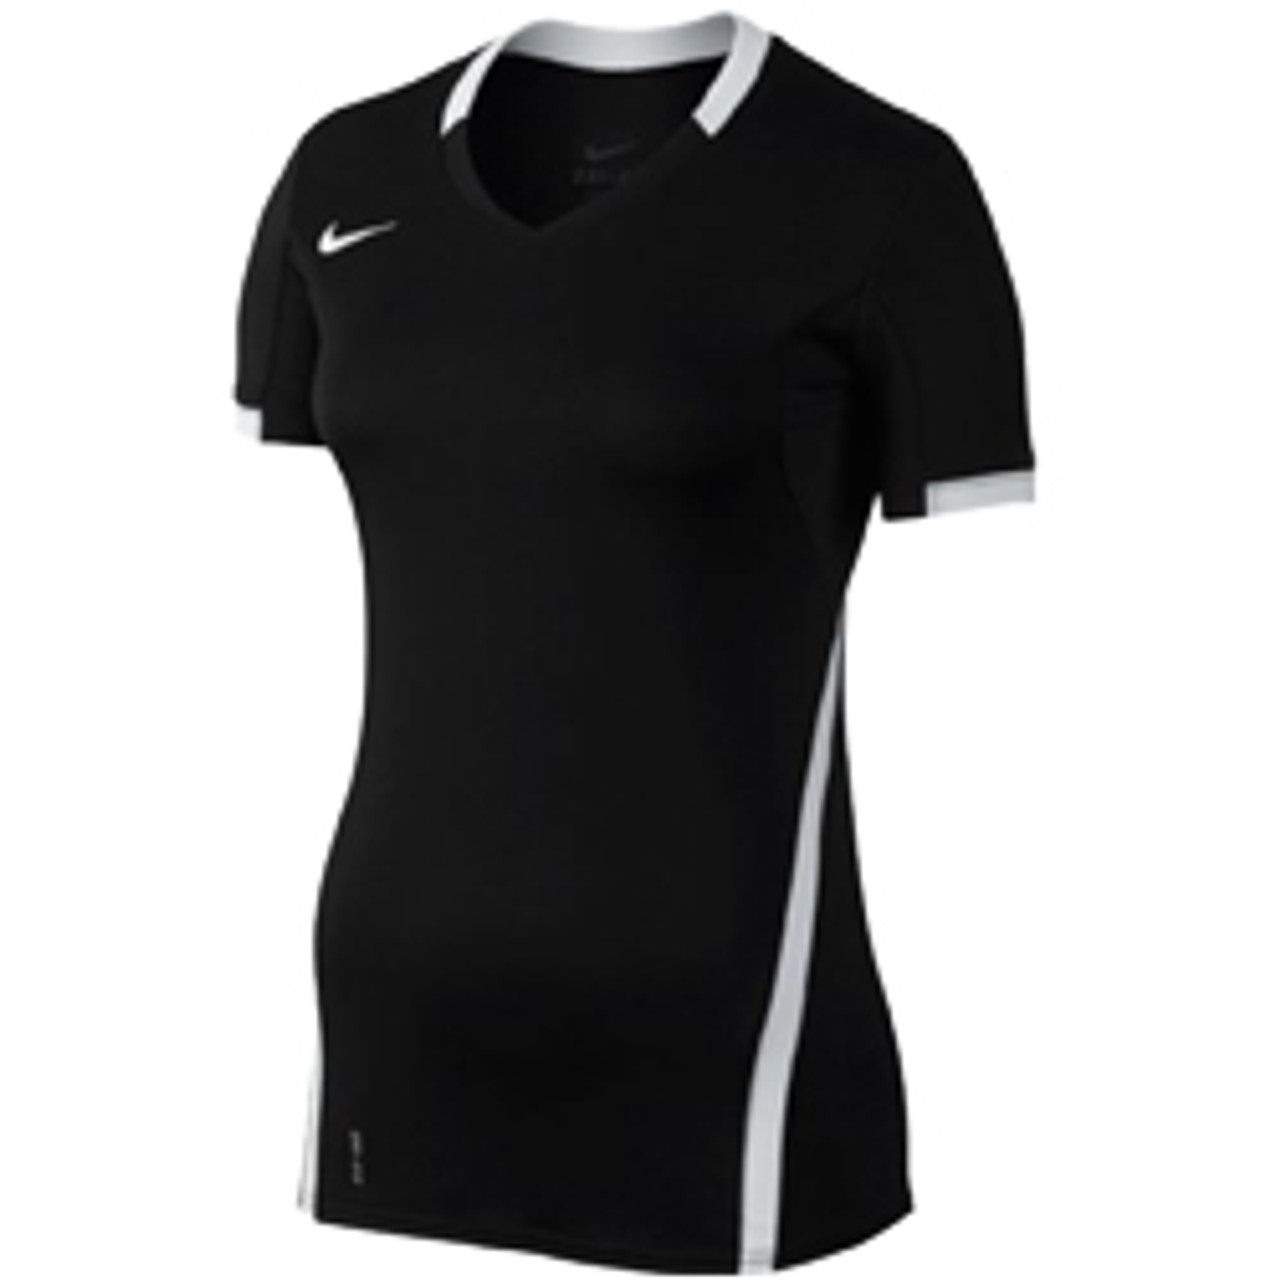 volleyball jersey black and white